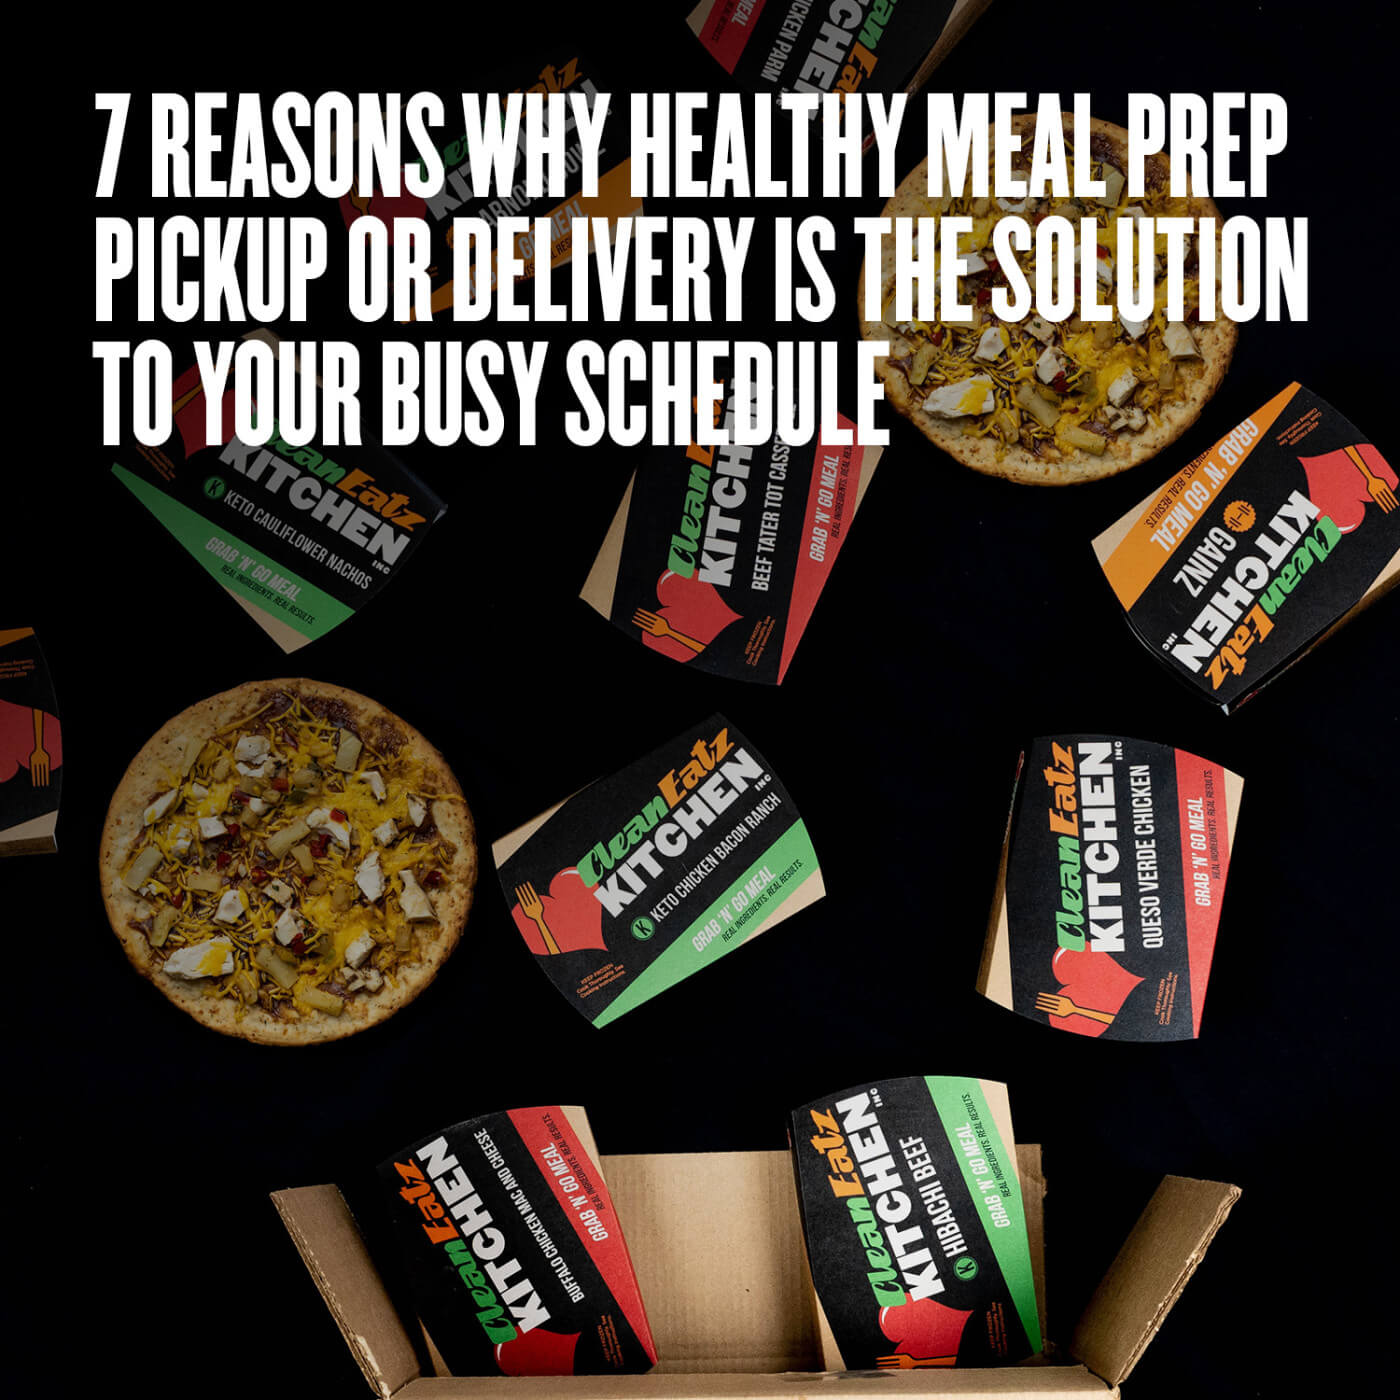 7 Reasons Why Healthy Meal Prep Pickup or Delivery Is the Solution to ...